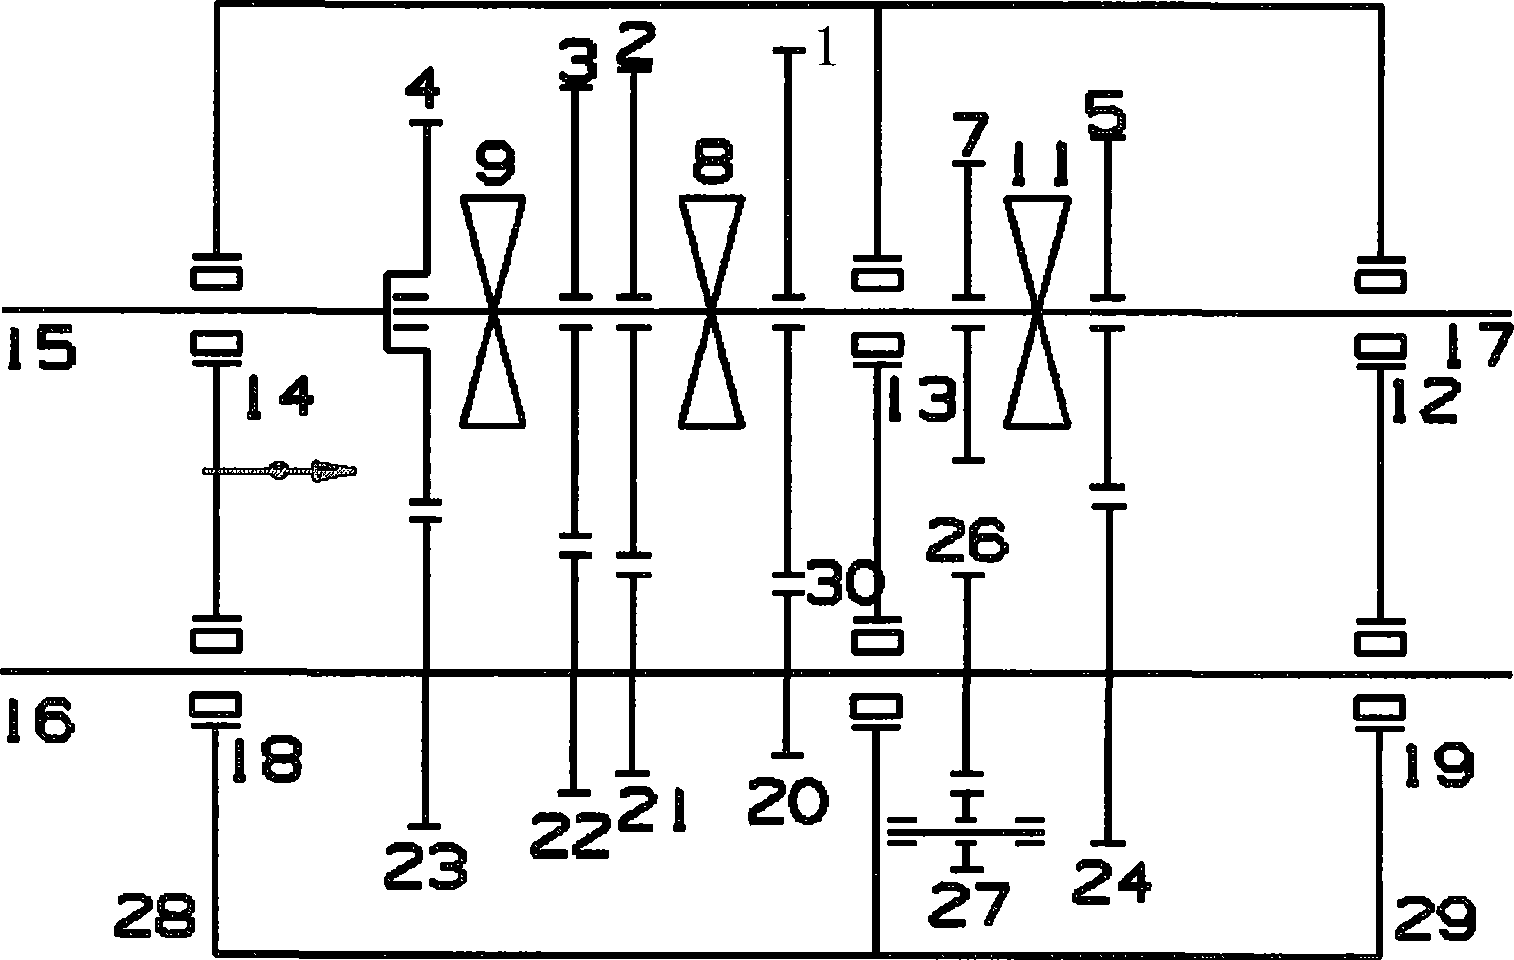 Mechanical synchronous transmission